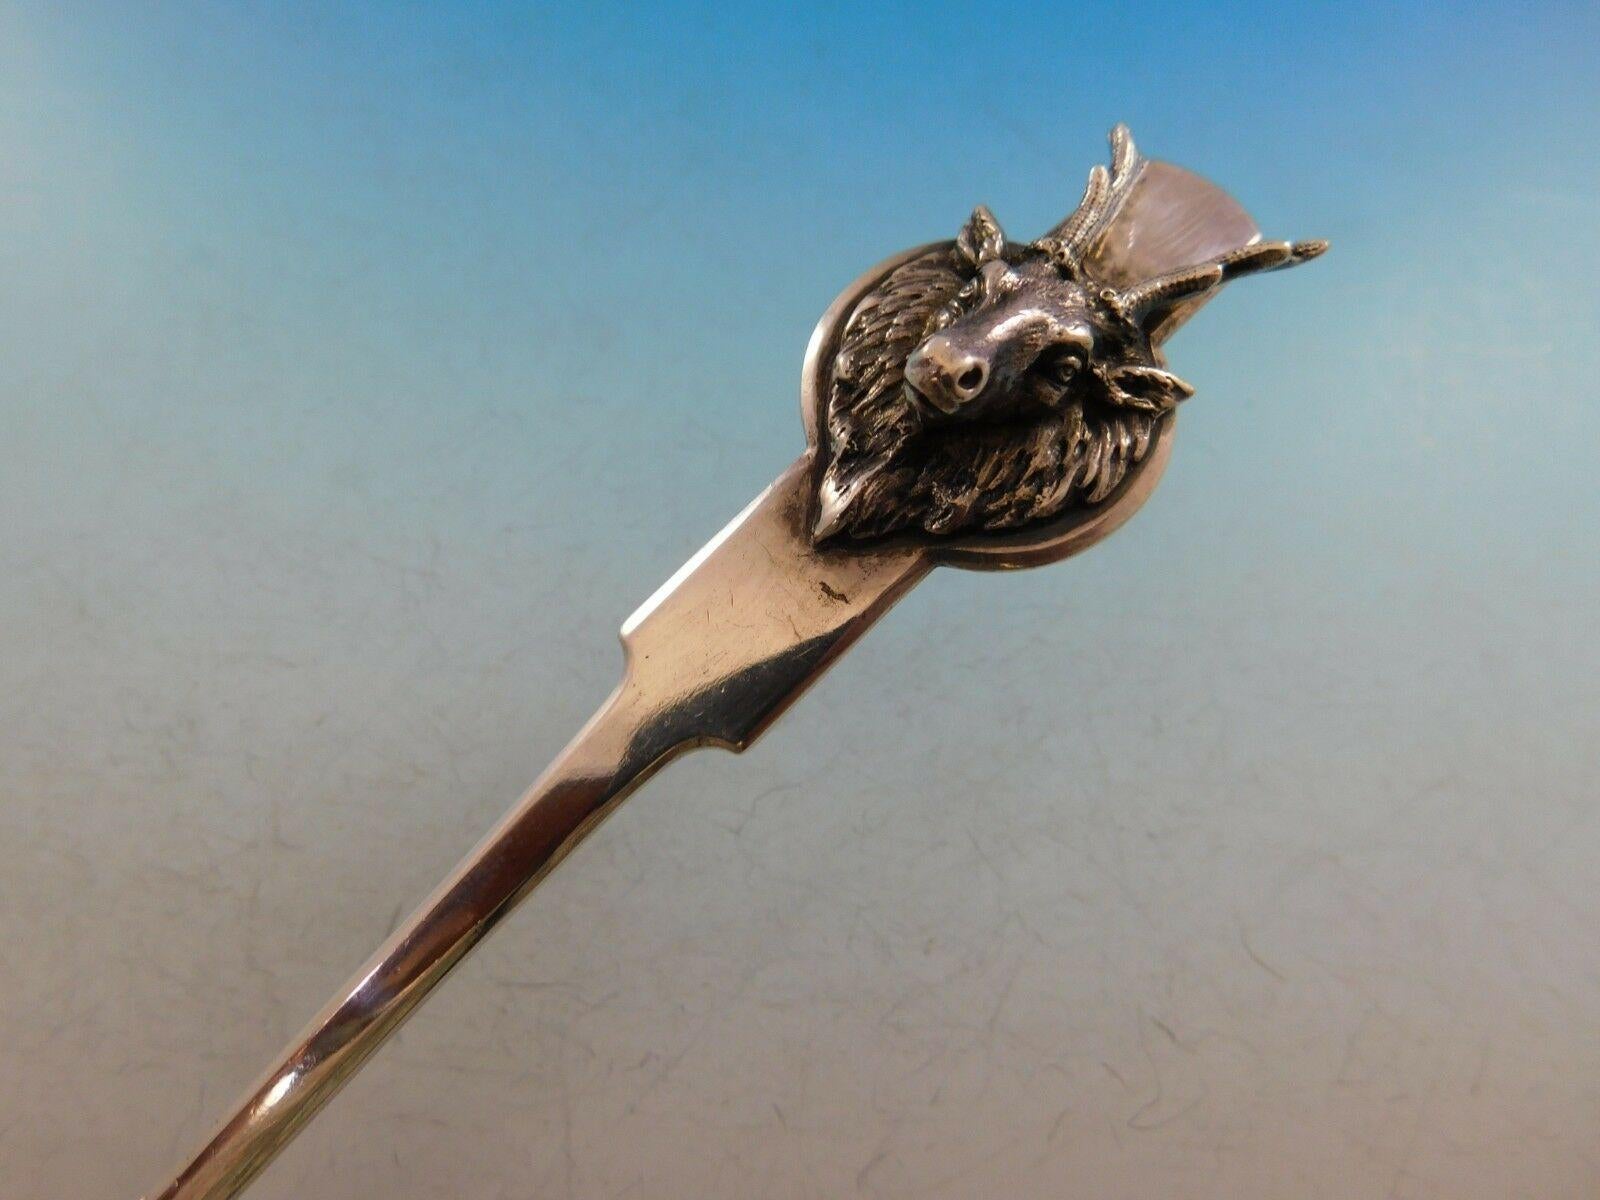 Saxon Stag by Gorham

Masterfully crafted sterling silver berry spoon measuring 8 3/4